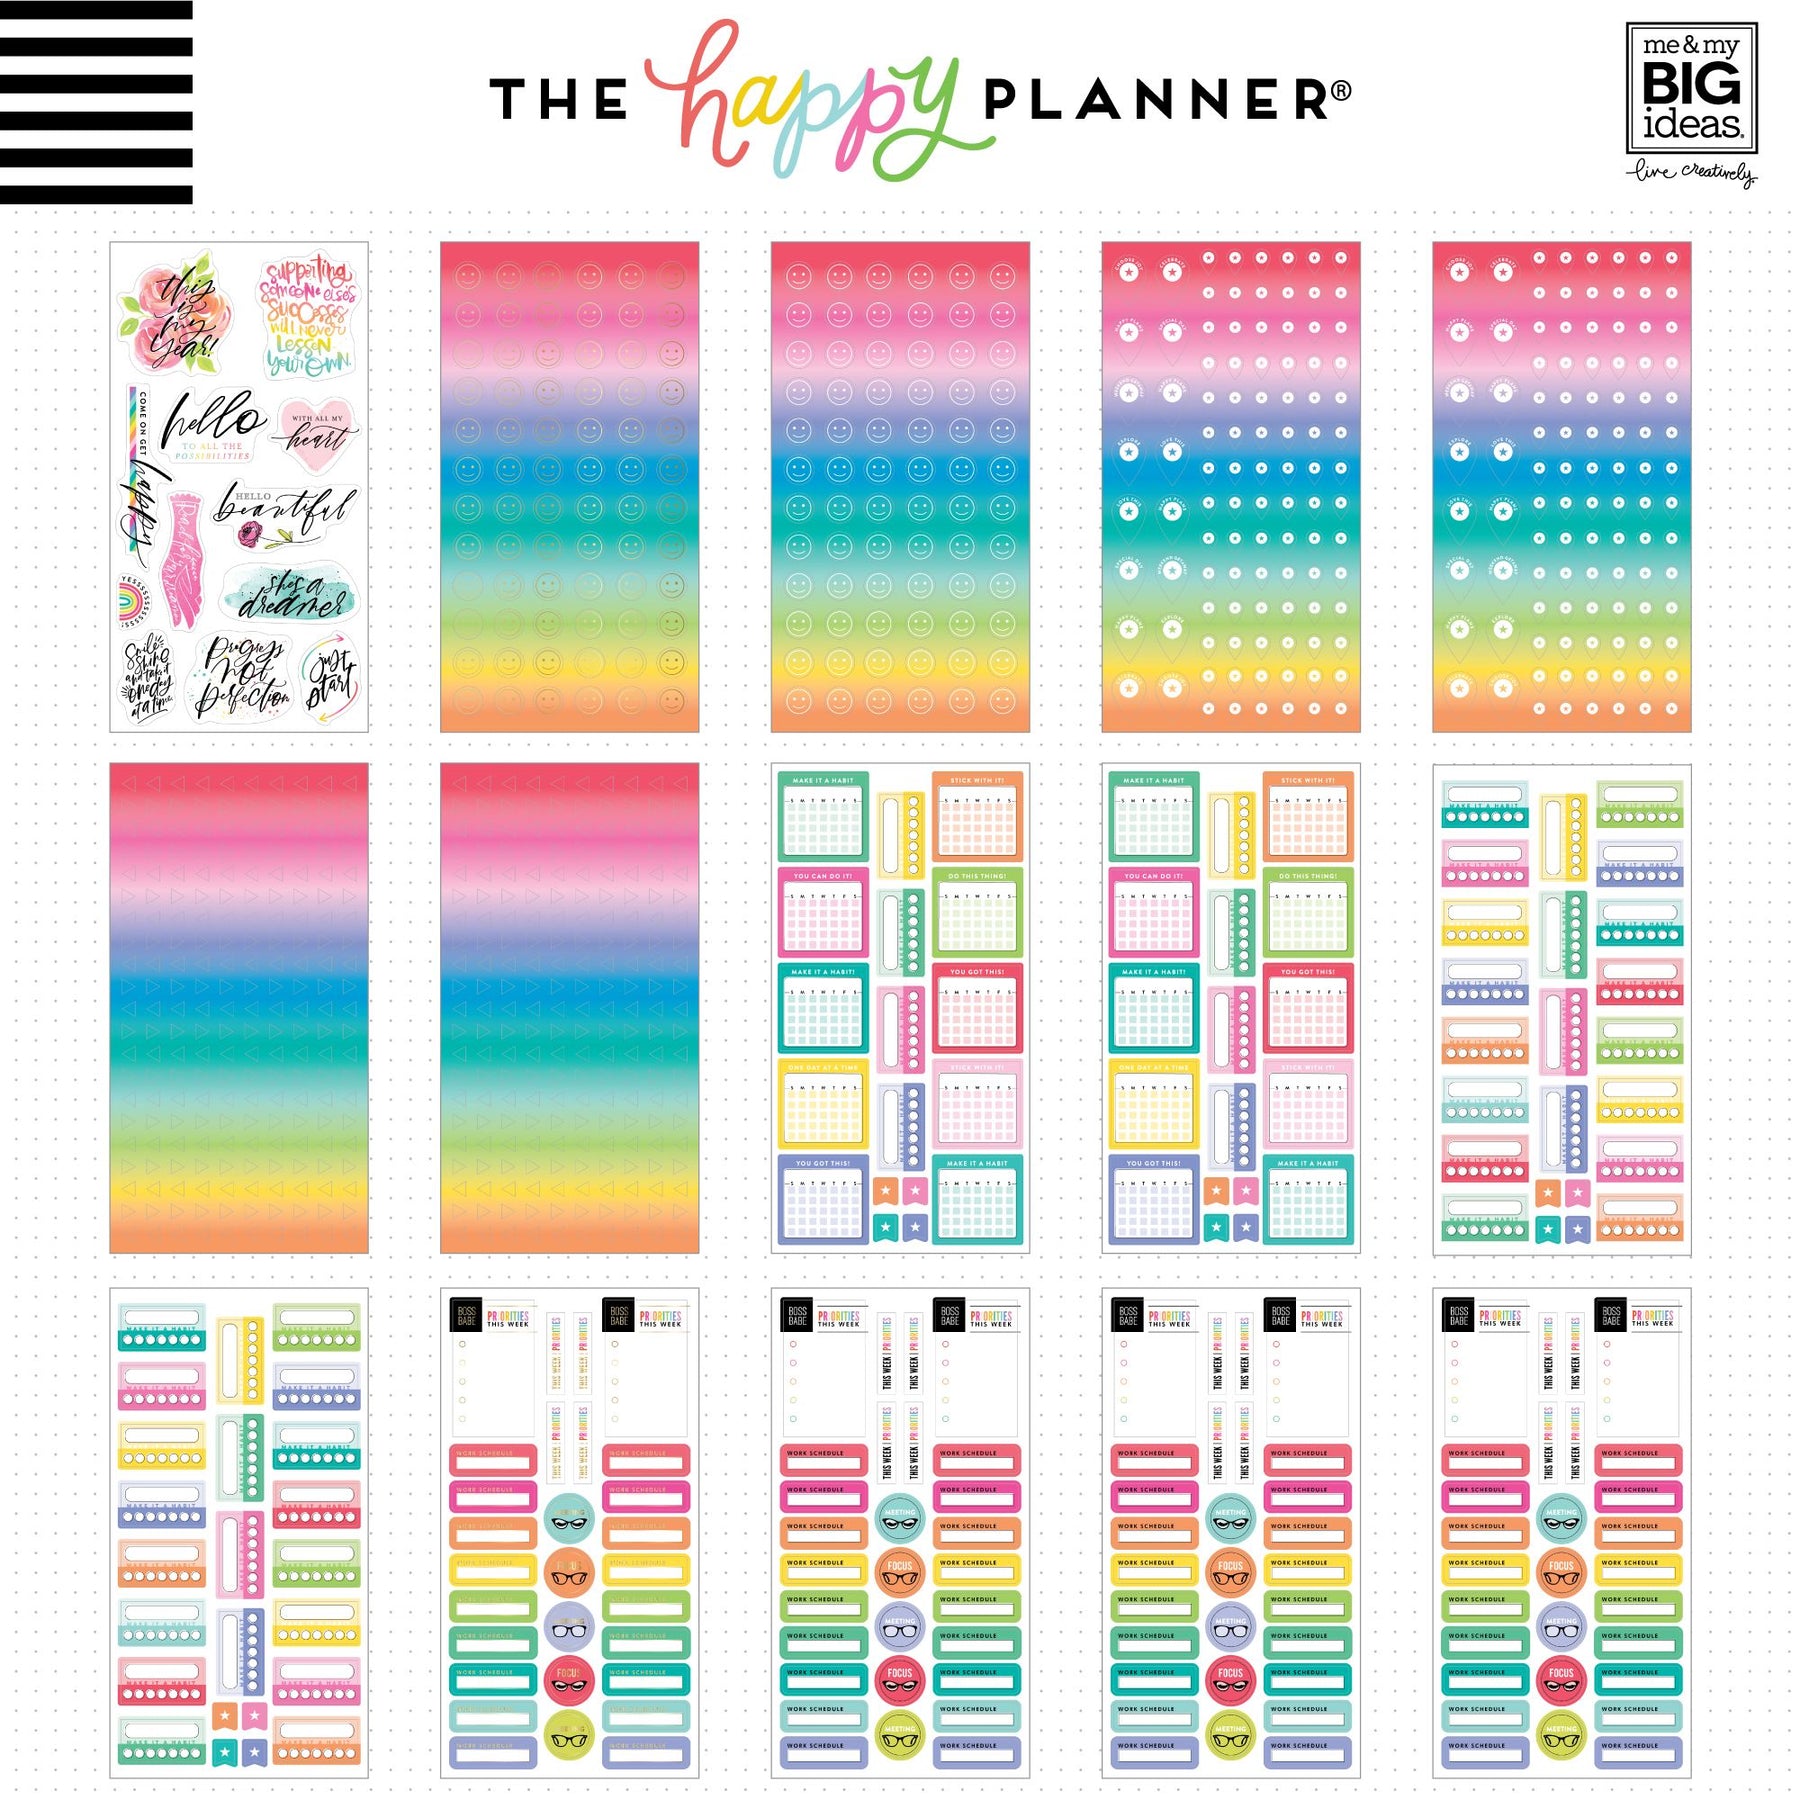 Mega Value Pack Stickers - 100 Sheets - Rainbow Colorful Boxes – The Happy  Planner